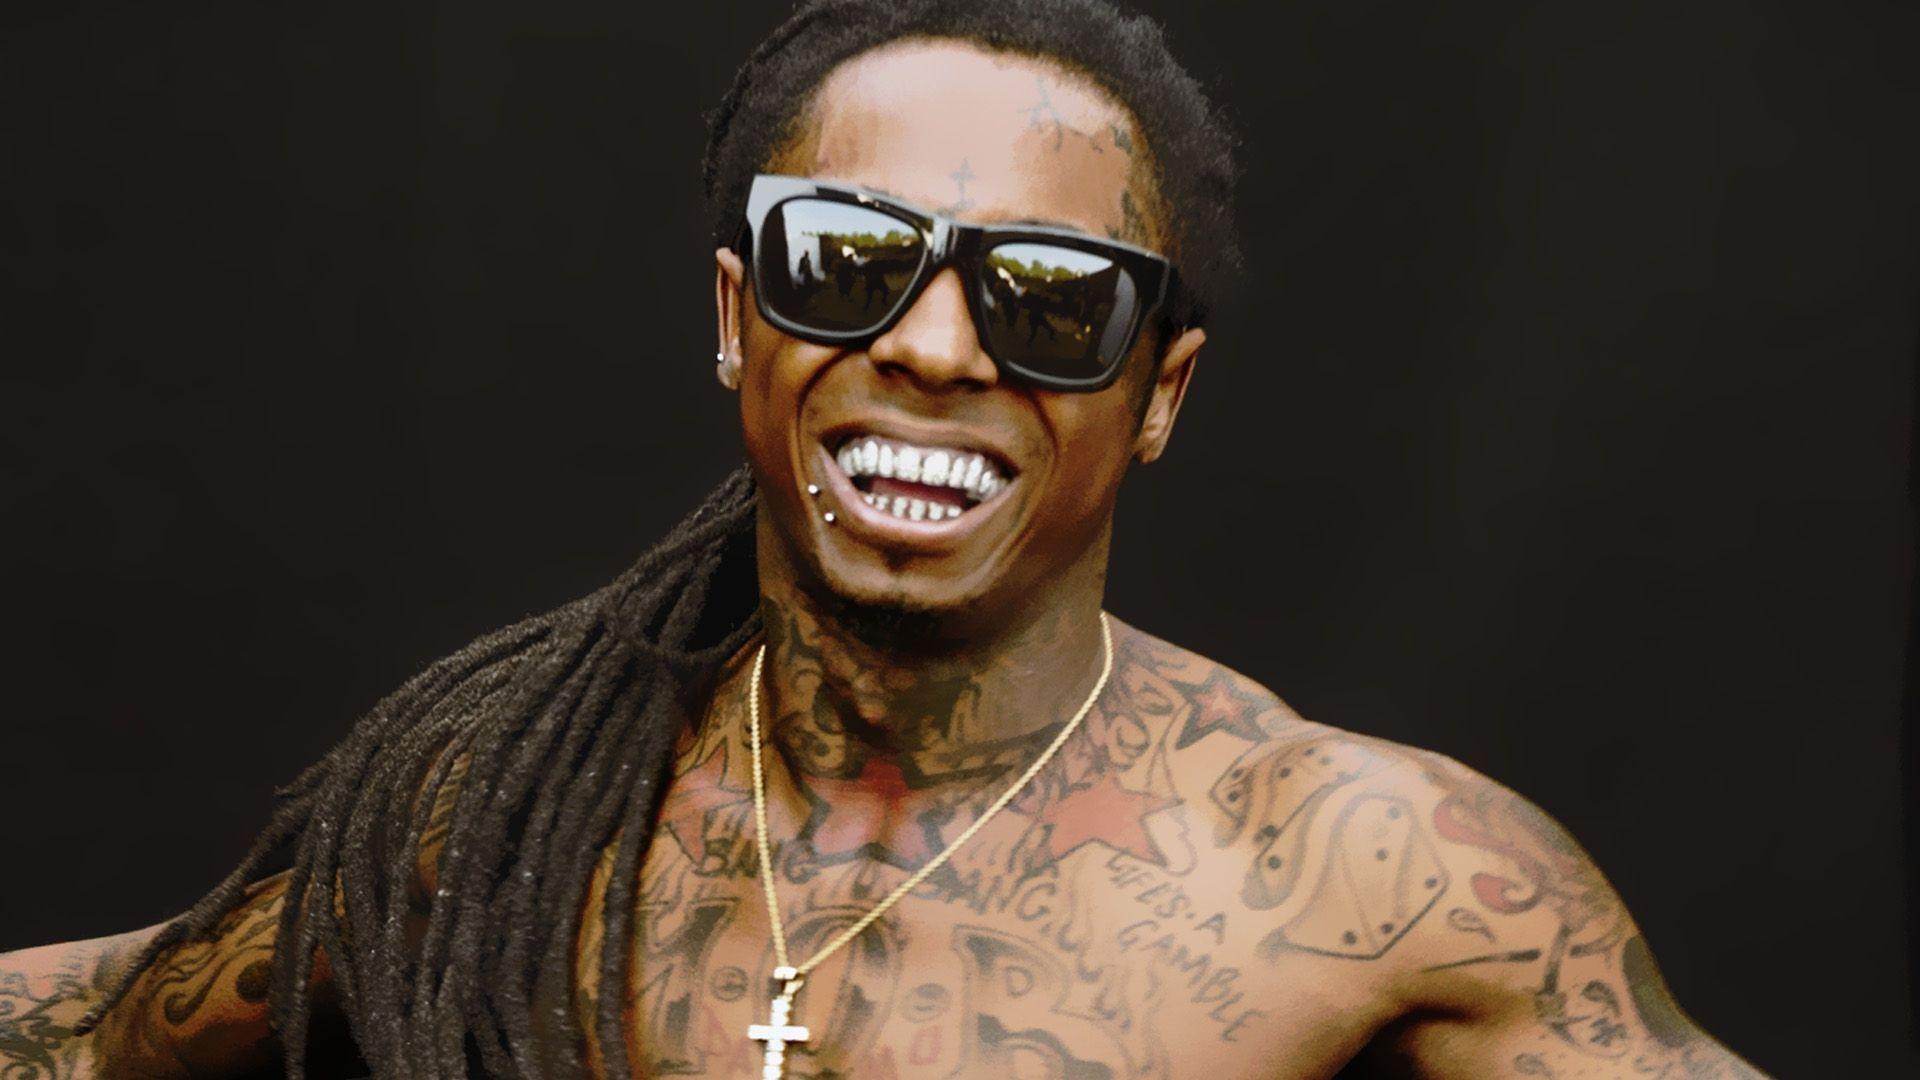 Lil Wayne Wallpaper High Resolution and Quality Download